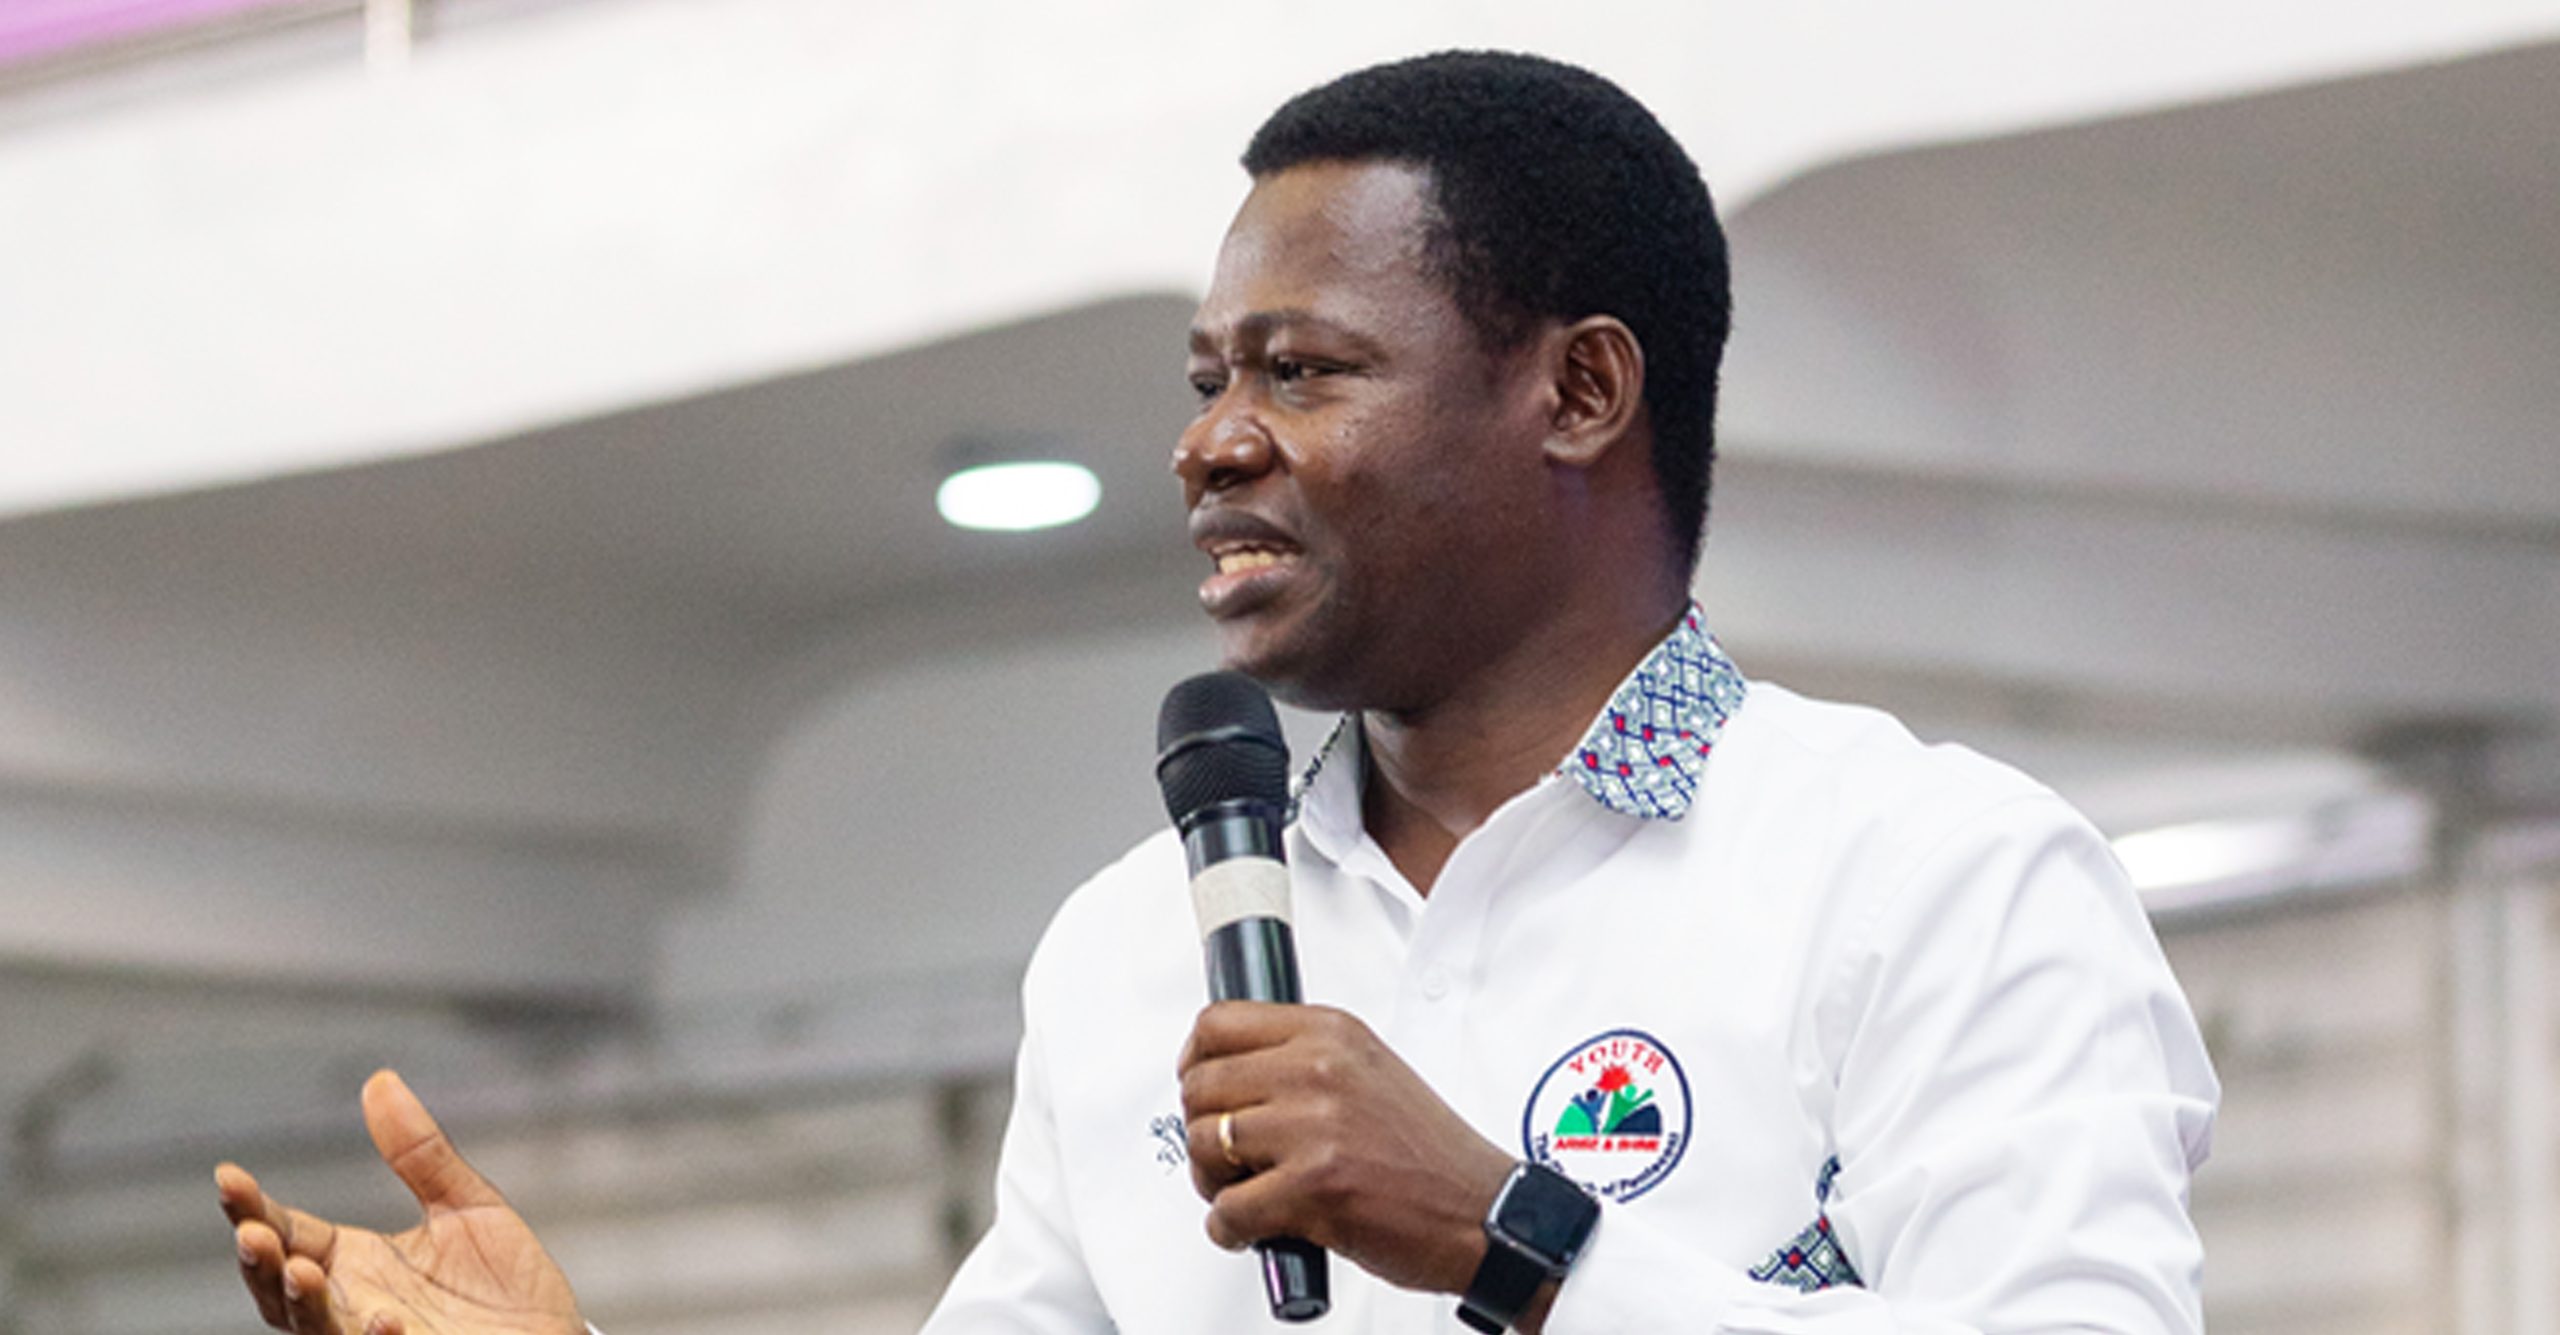 Be Committed To Jesus Christ – Apostle Hagan Advises Youth